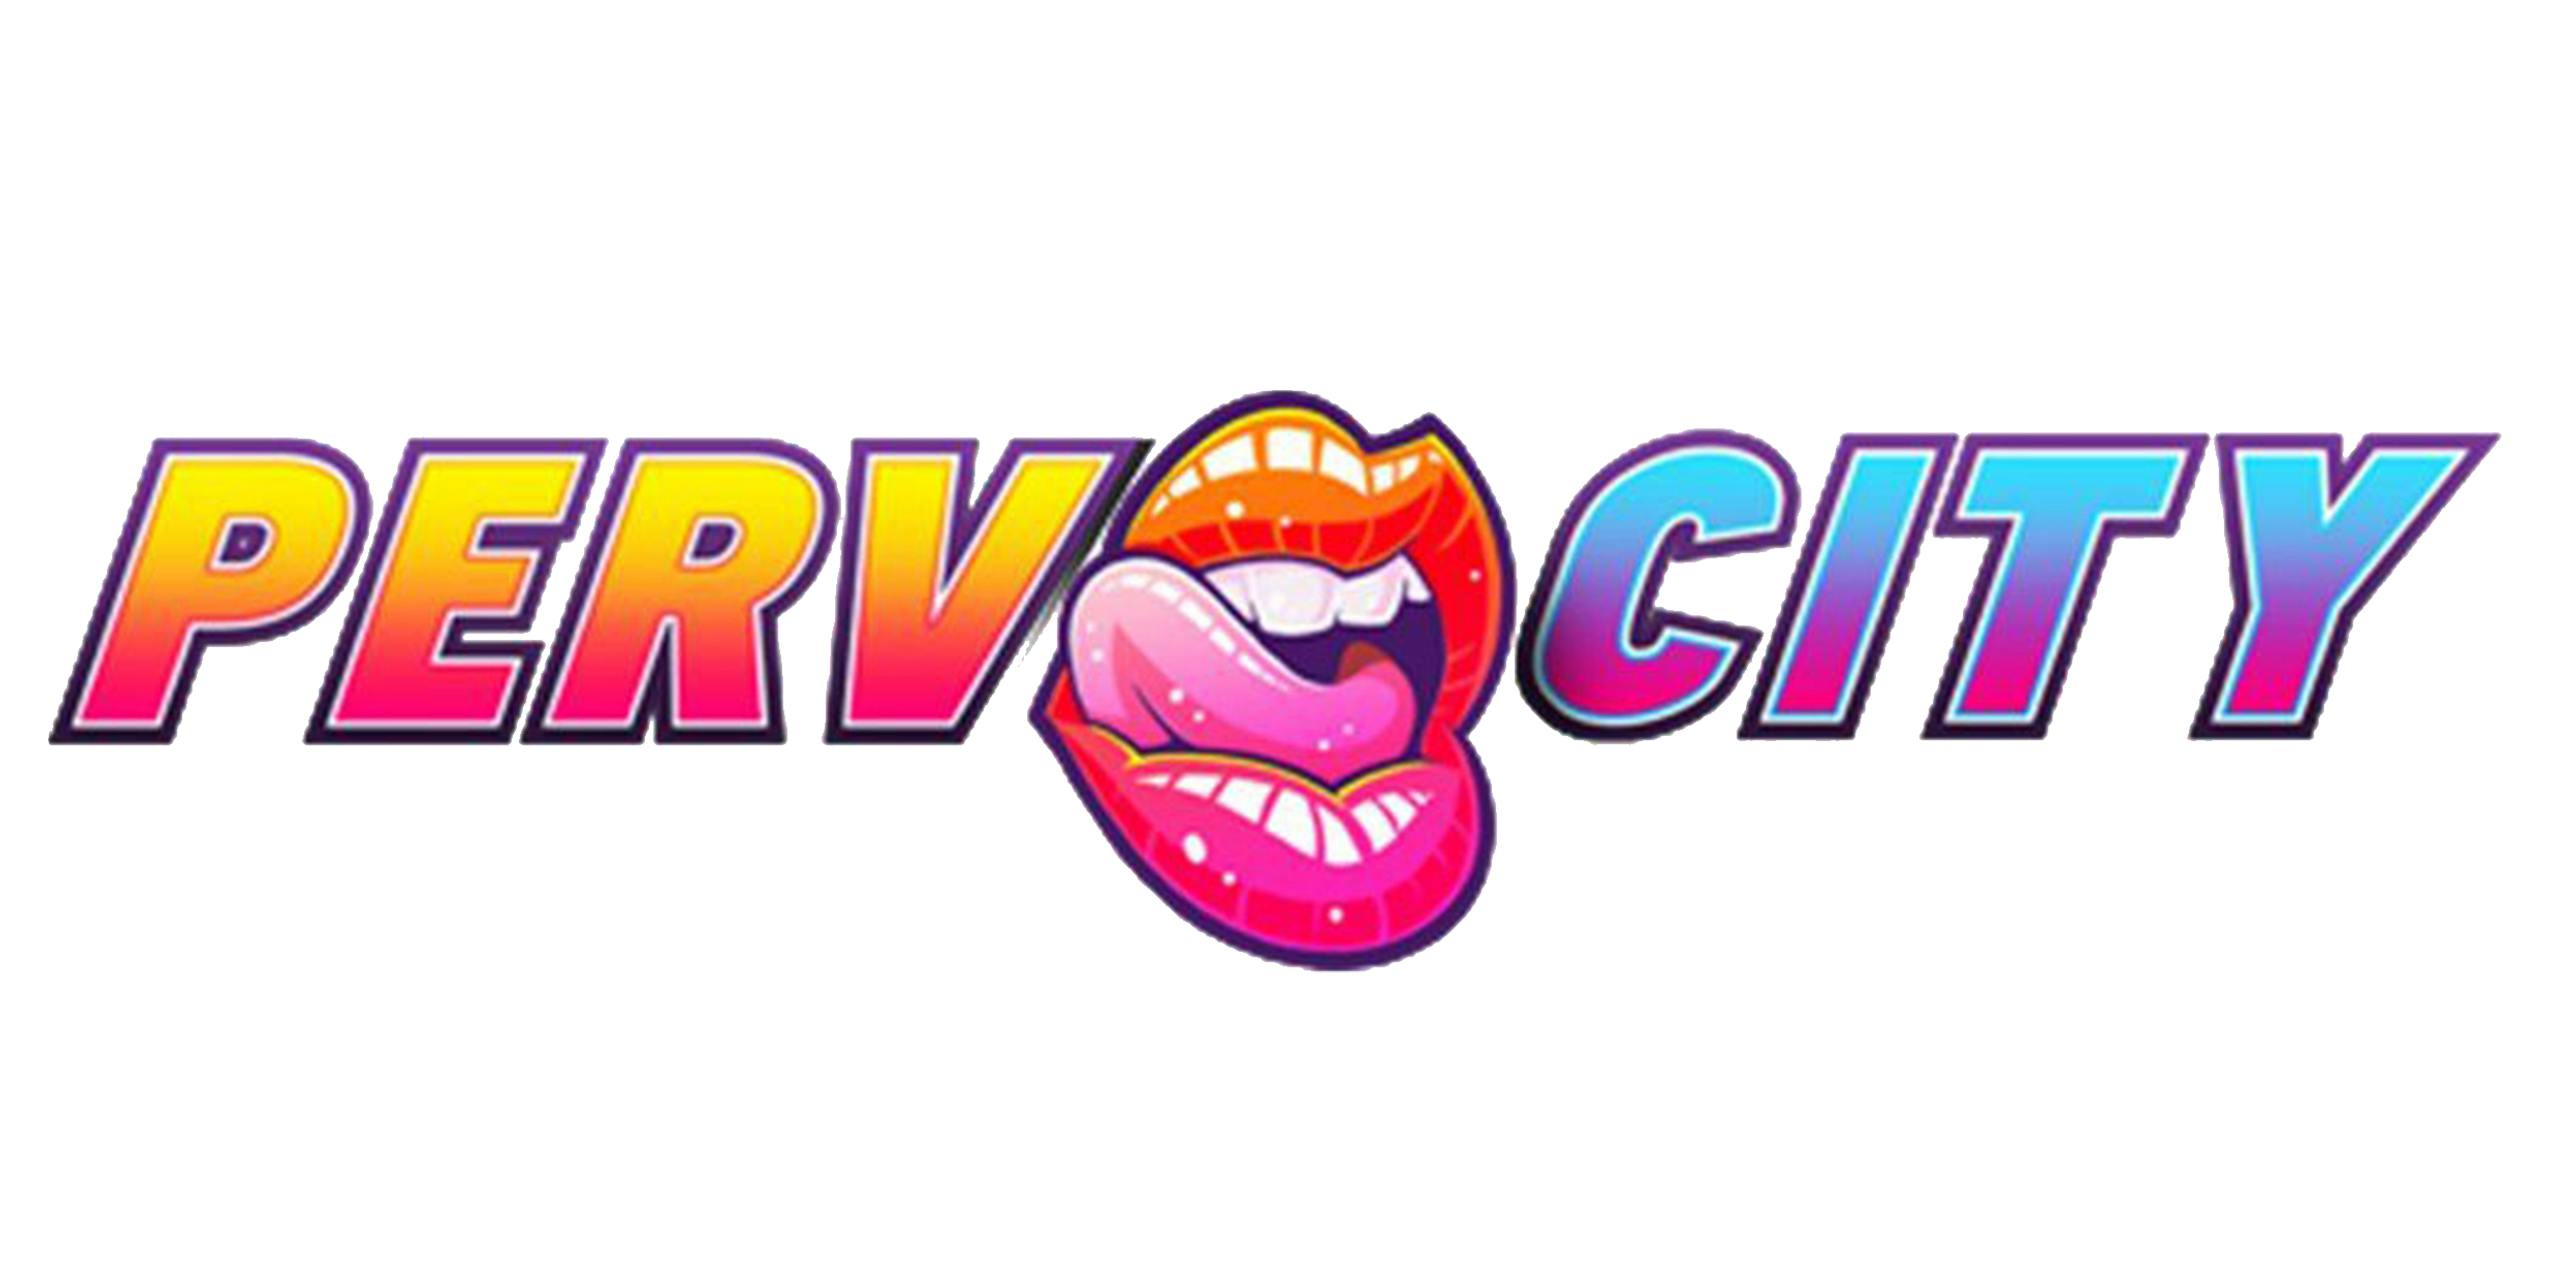 Pervocity Co0 - Pervcity delivers exclusive hardcore porn like no other site - The Daily Dot